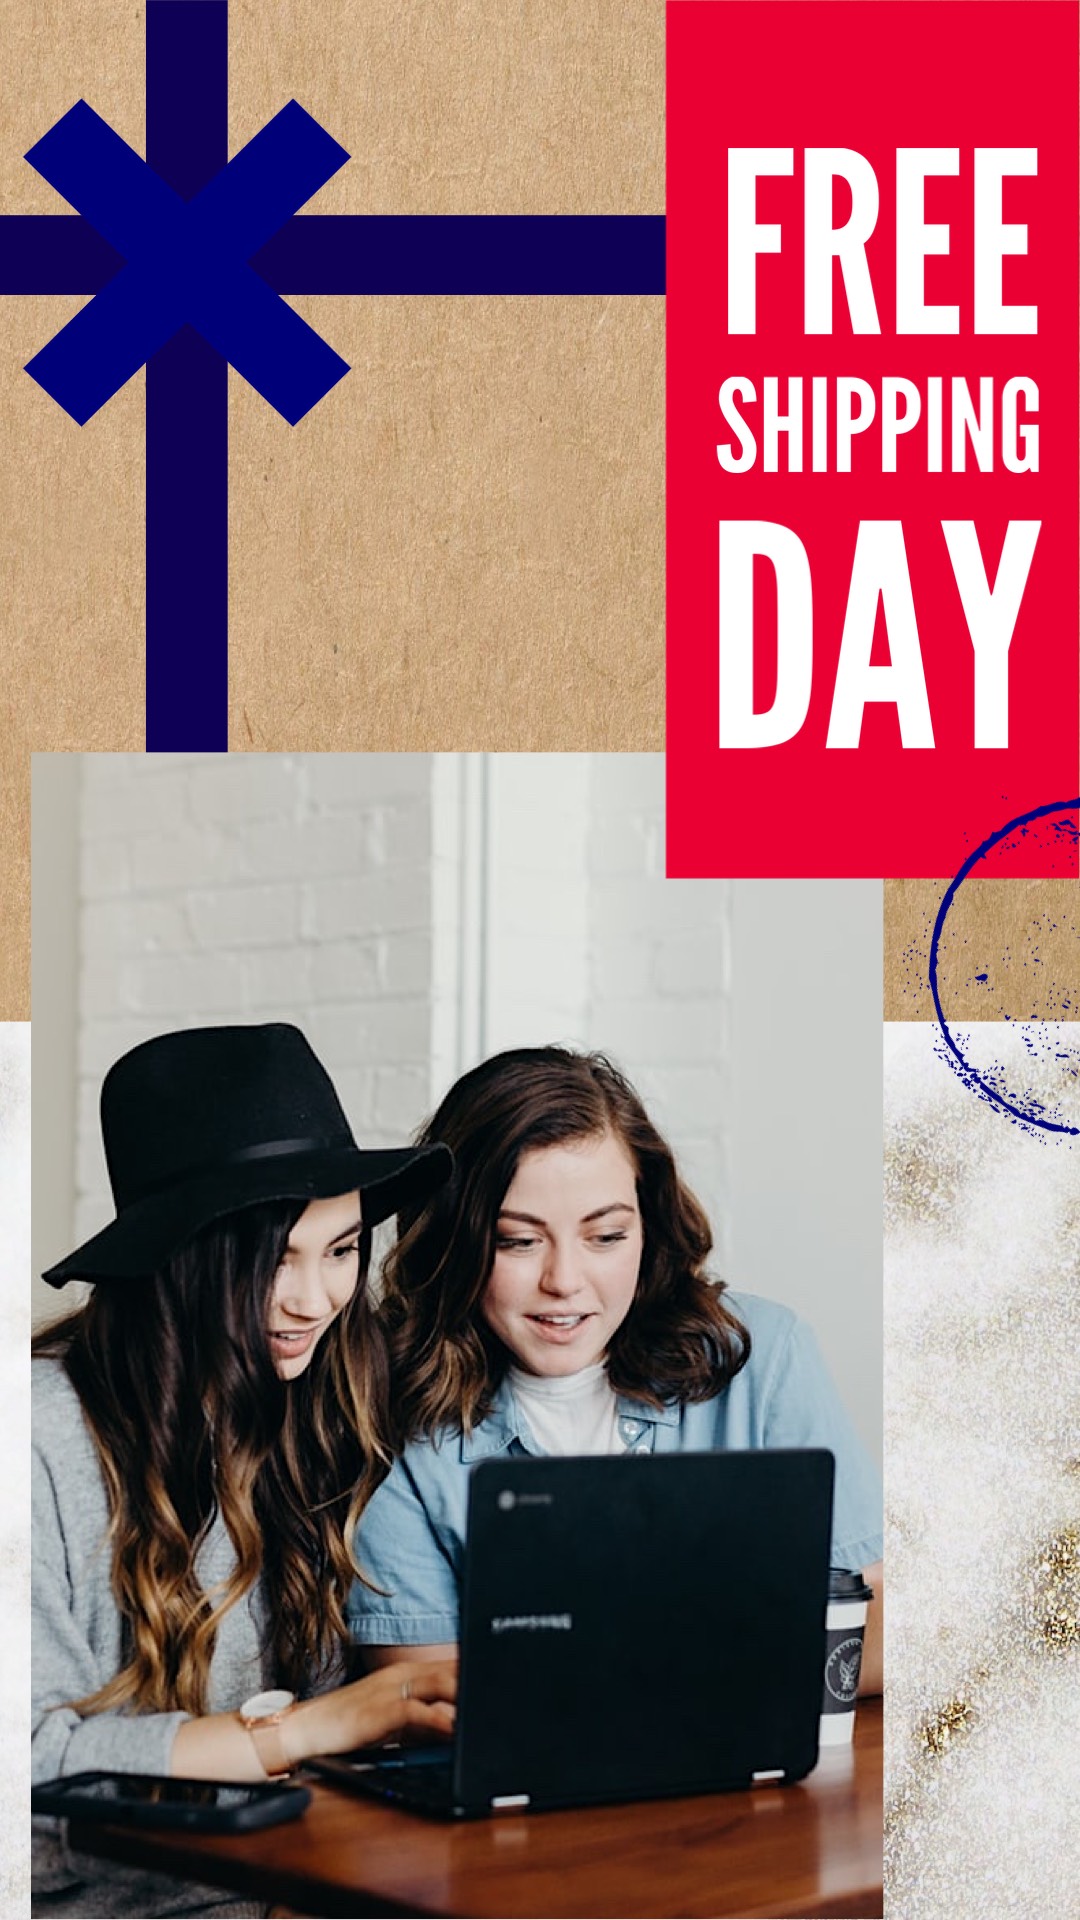 Friends shopping together online free shipping day sale flyer template 